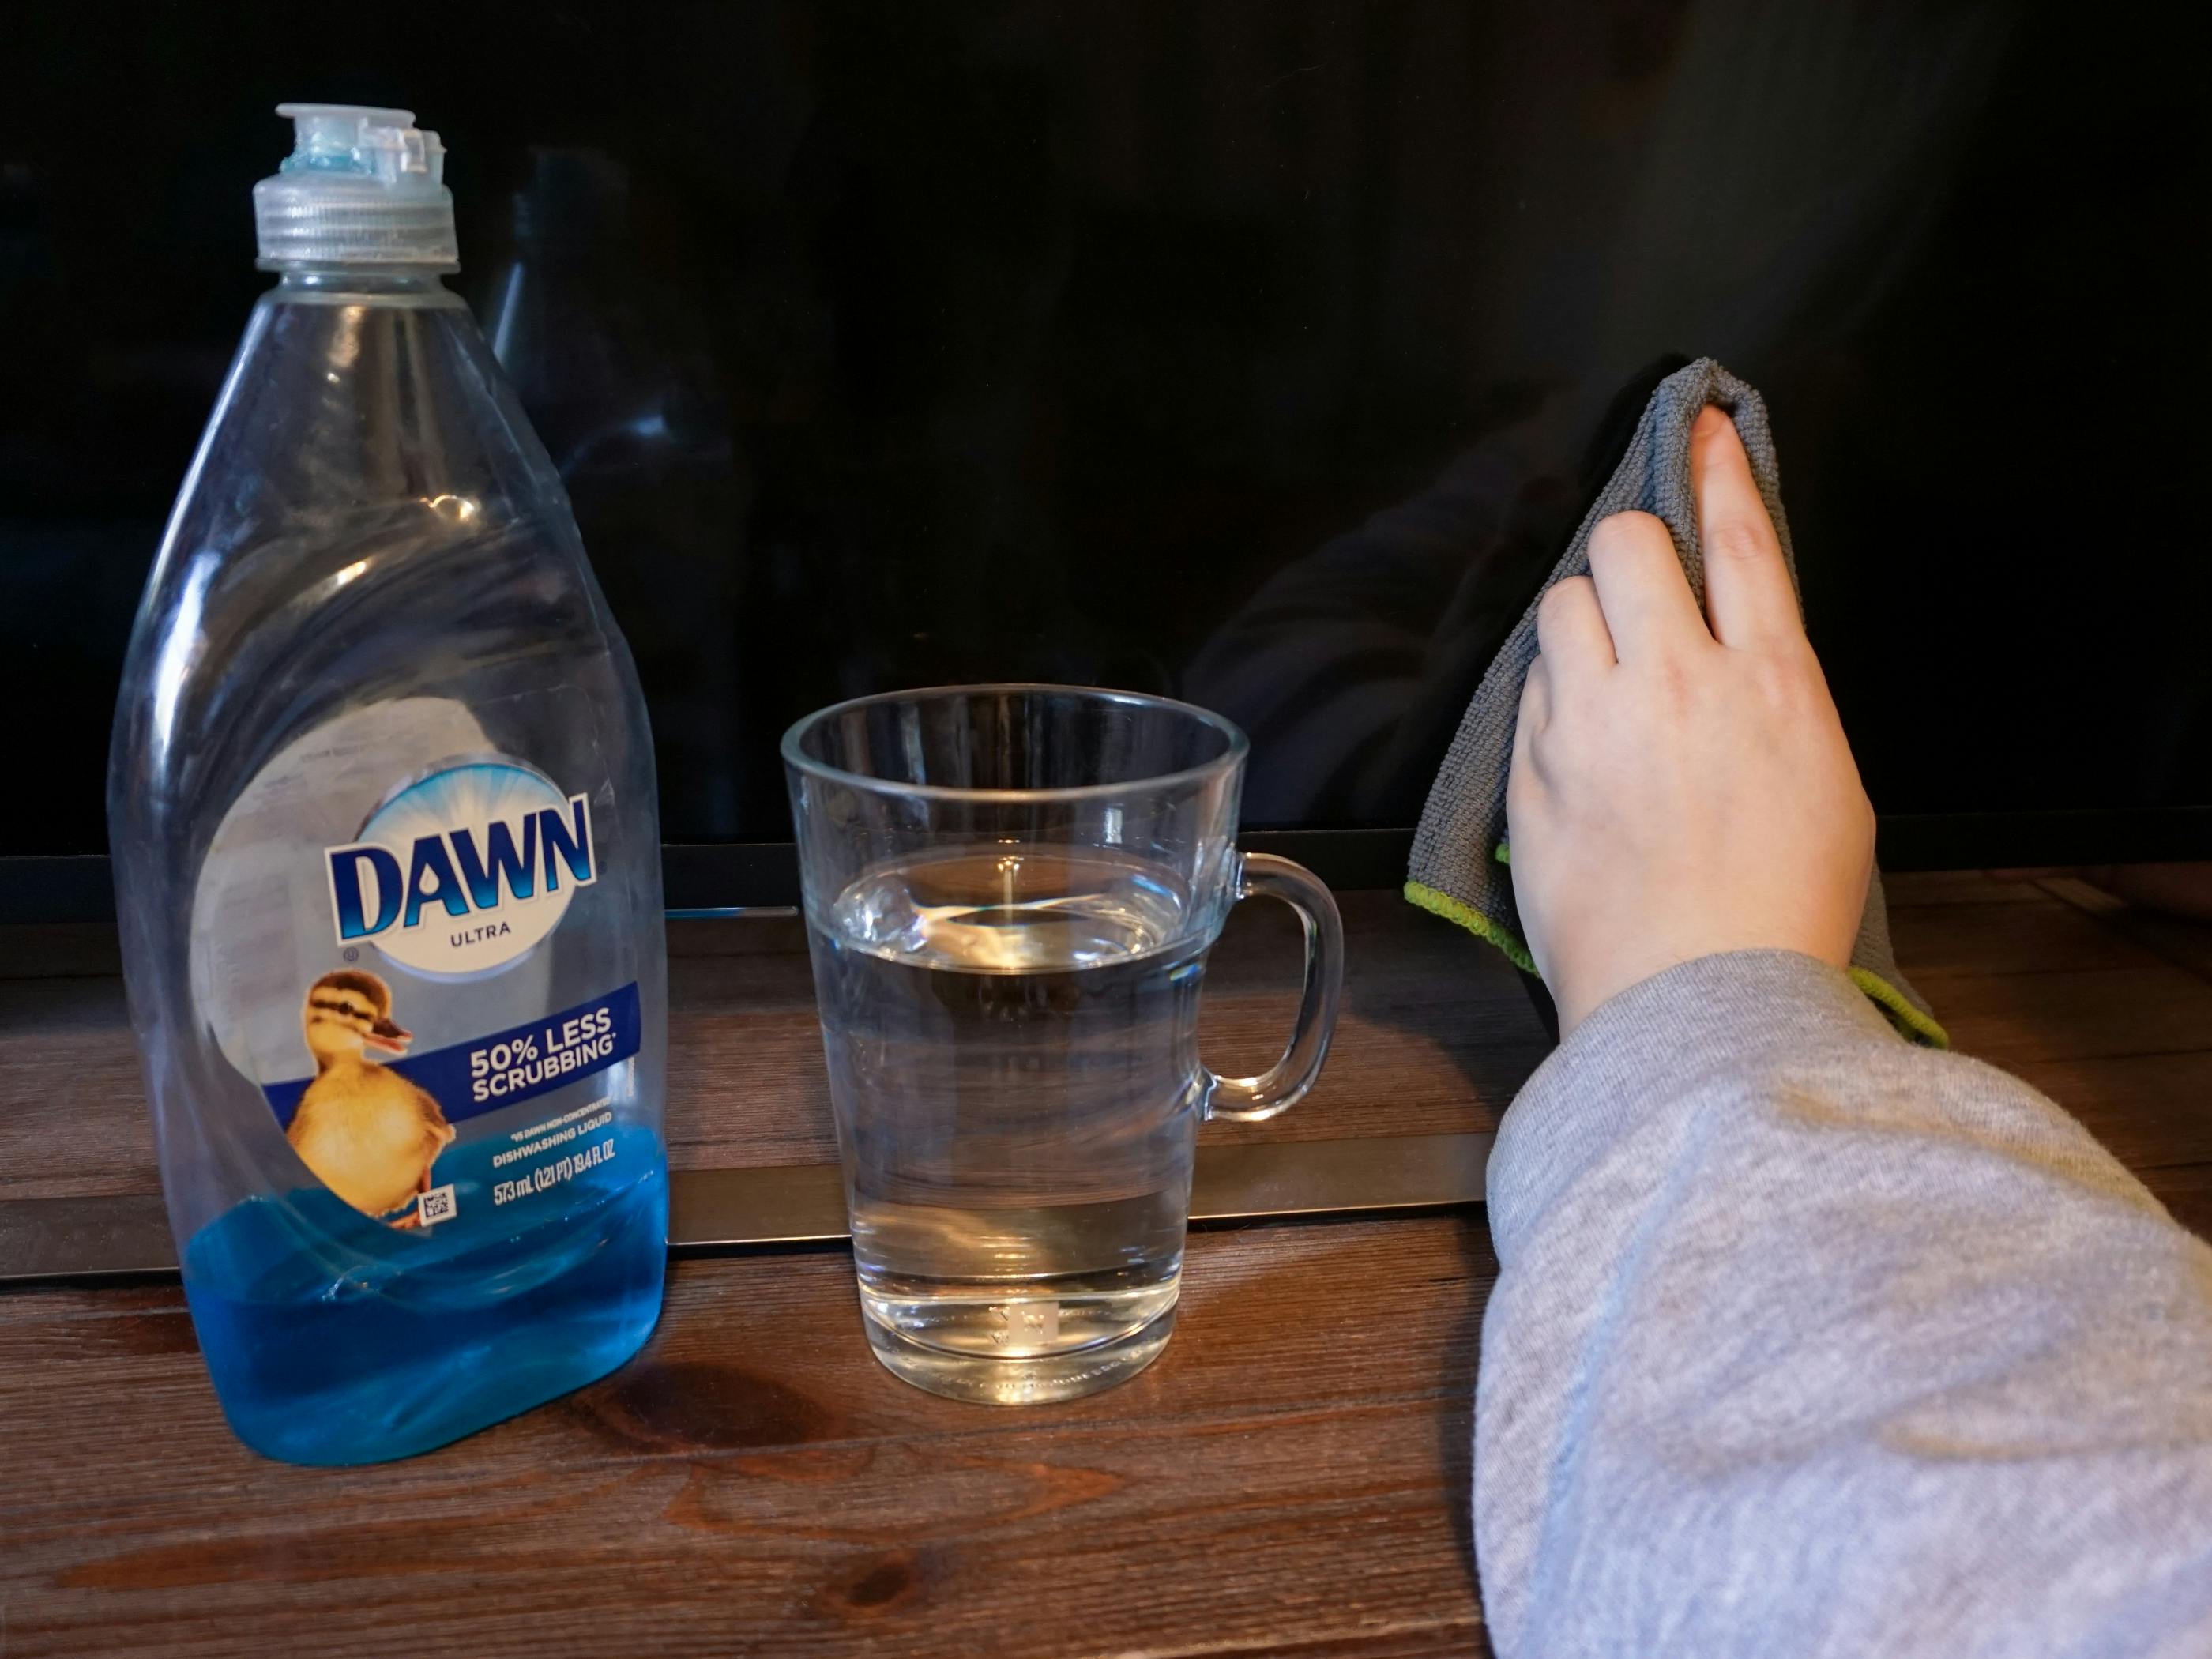 Someone using Dawn dish soap diluted in water to get a smear off of their TV with the bottle of dawn and a glass of water on the TV stand 